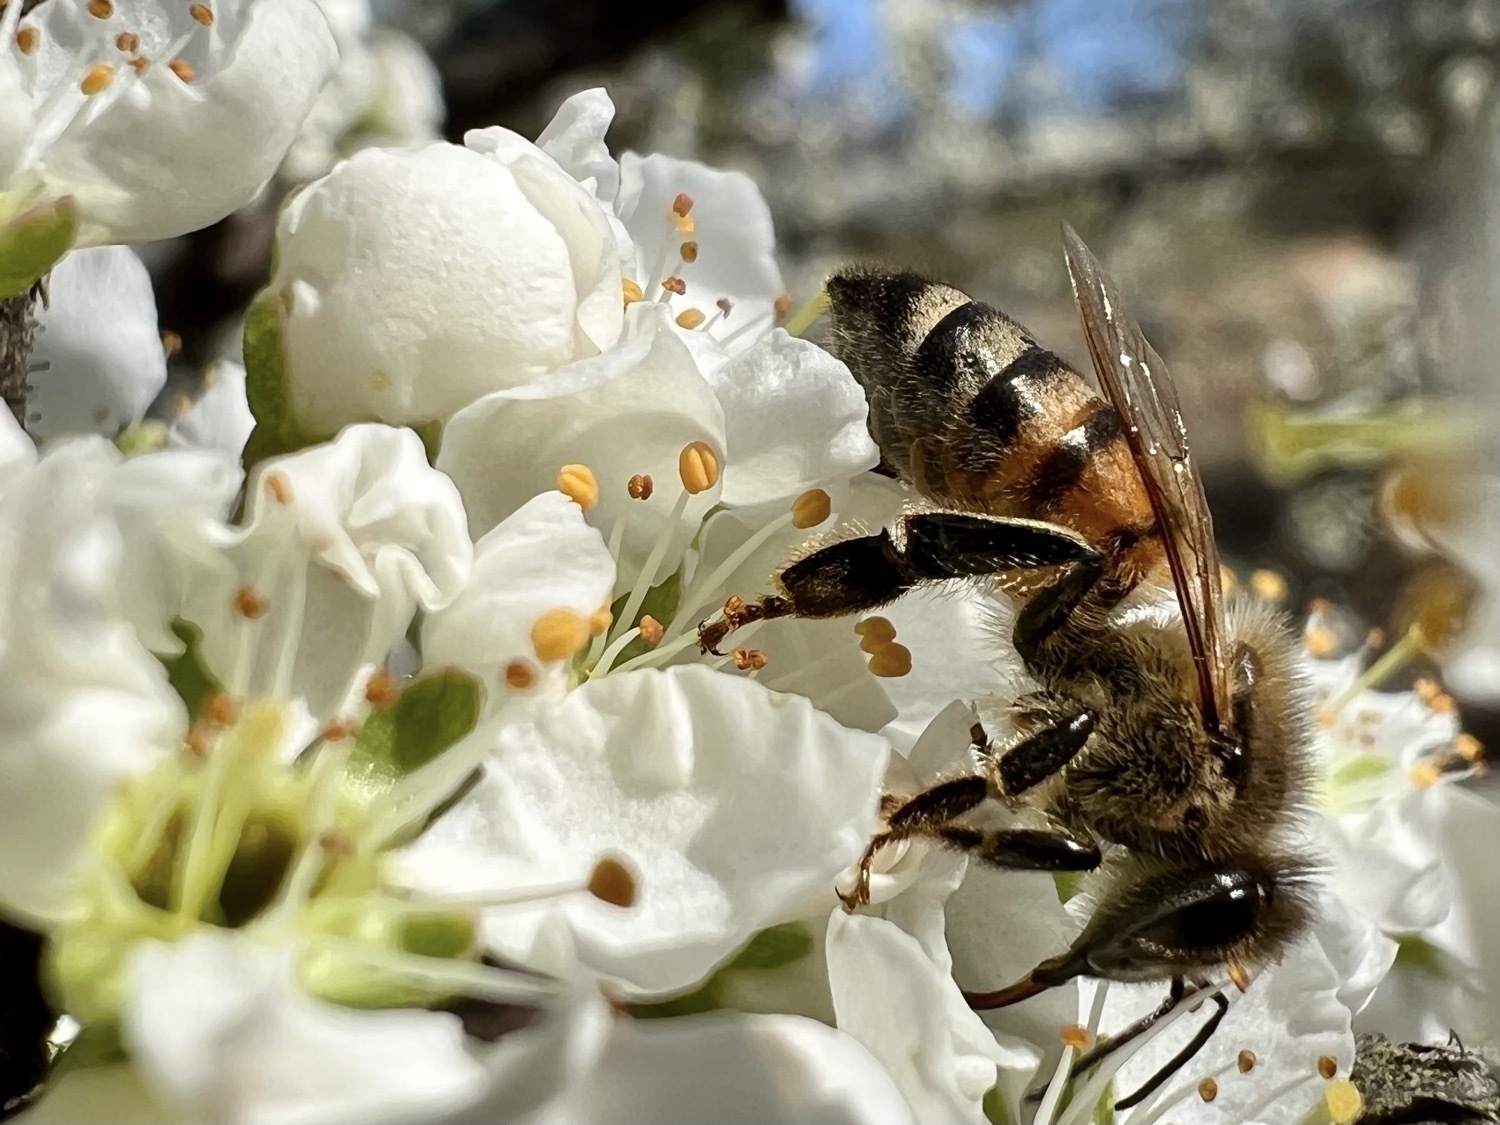 A honeybee is collecting pollen from white plum flowers.